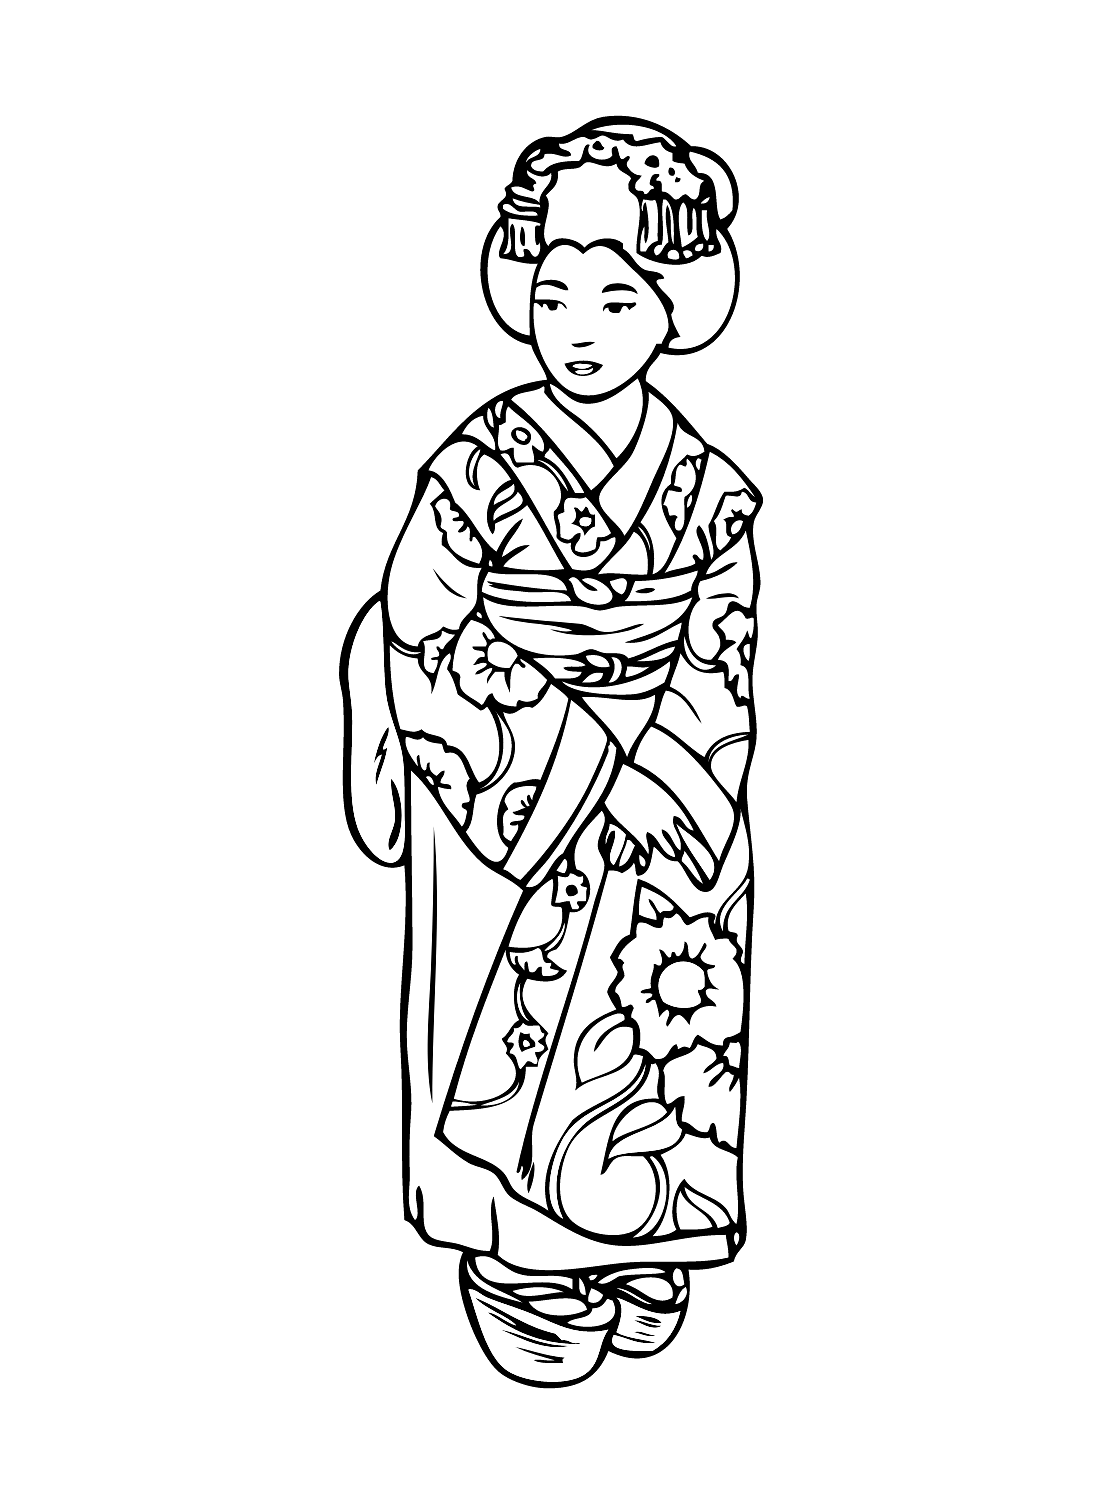 Japanese Woman in Kimono Coloring Pages